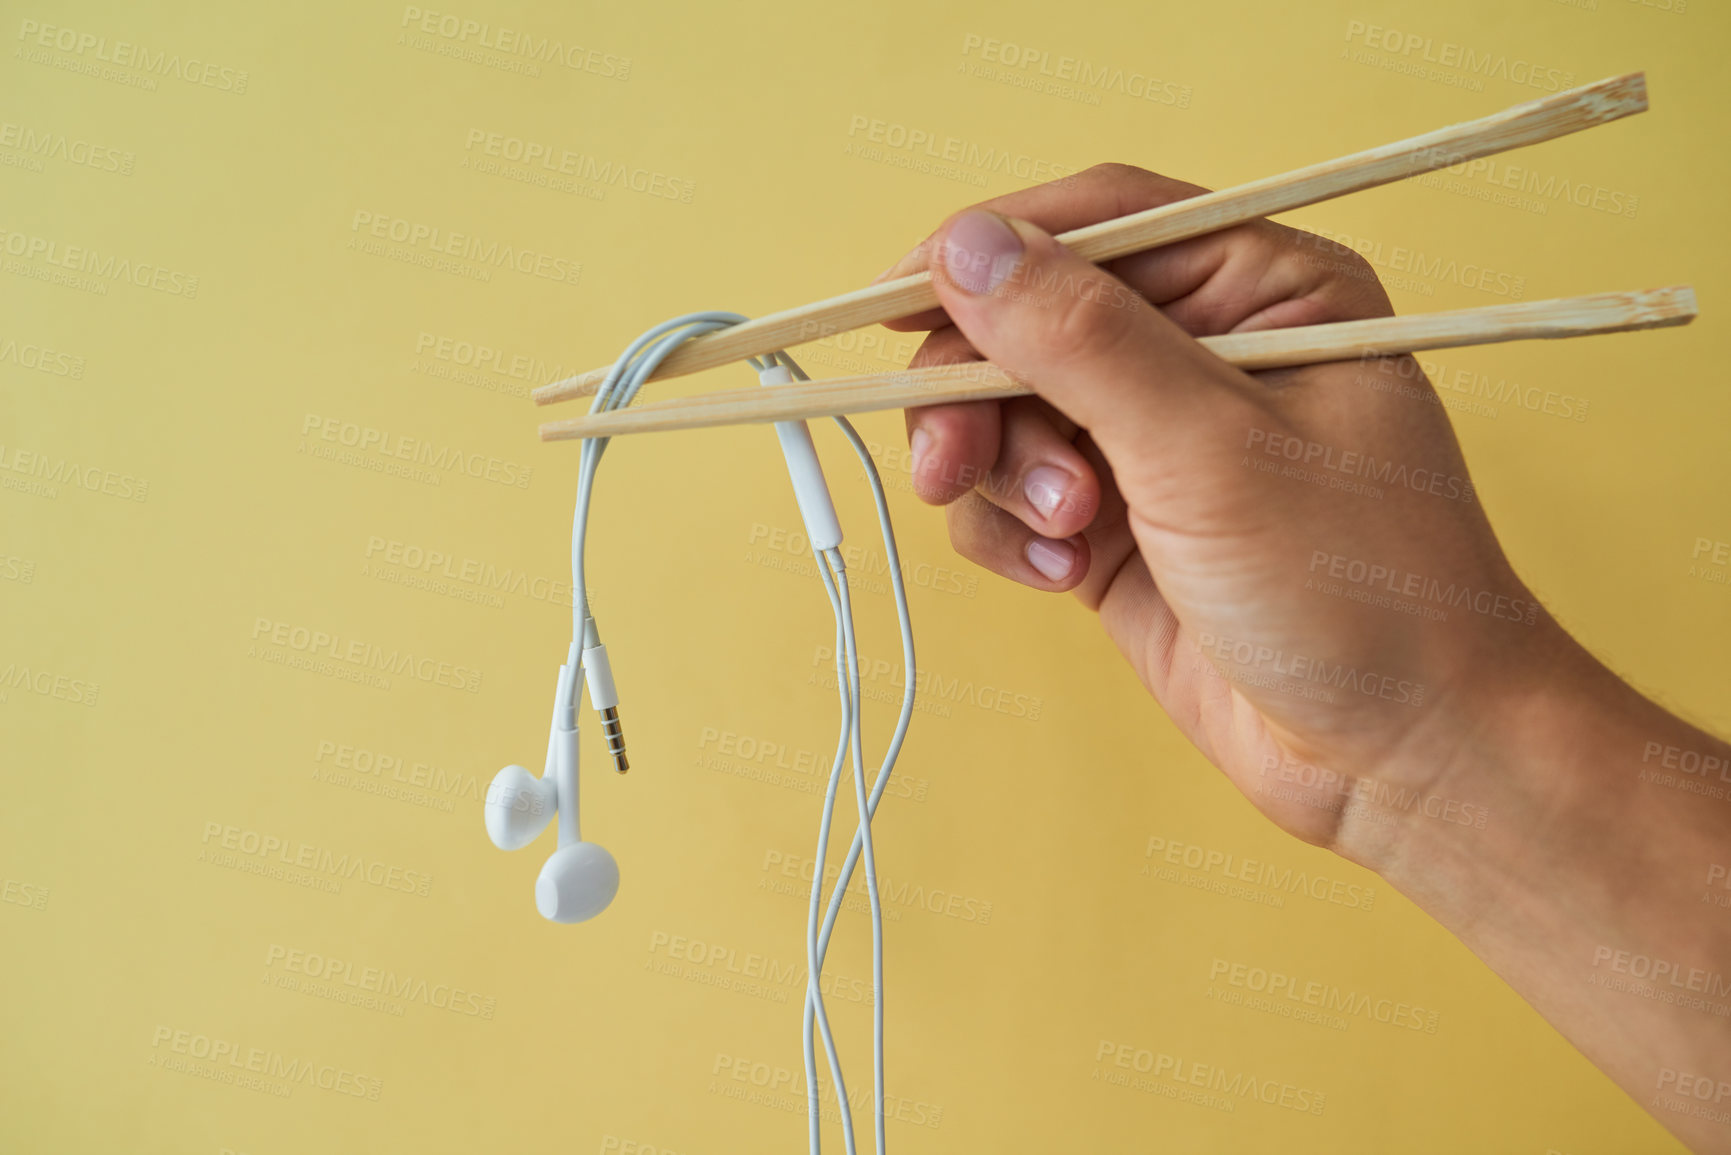 Buy stock photo Cropped studio shot of a man holding earphones wrapped around chopsticks against a yellow background